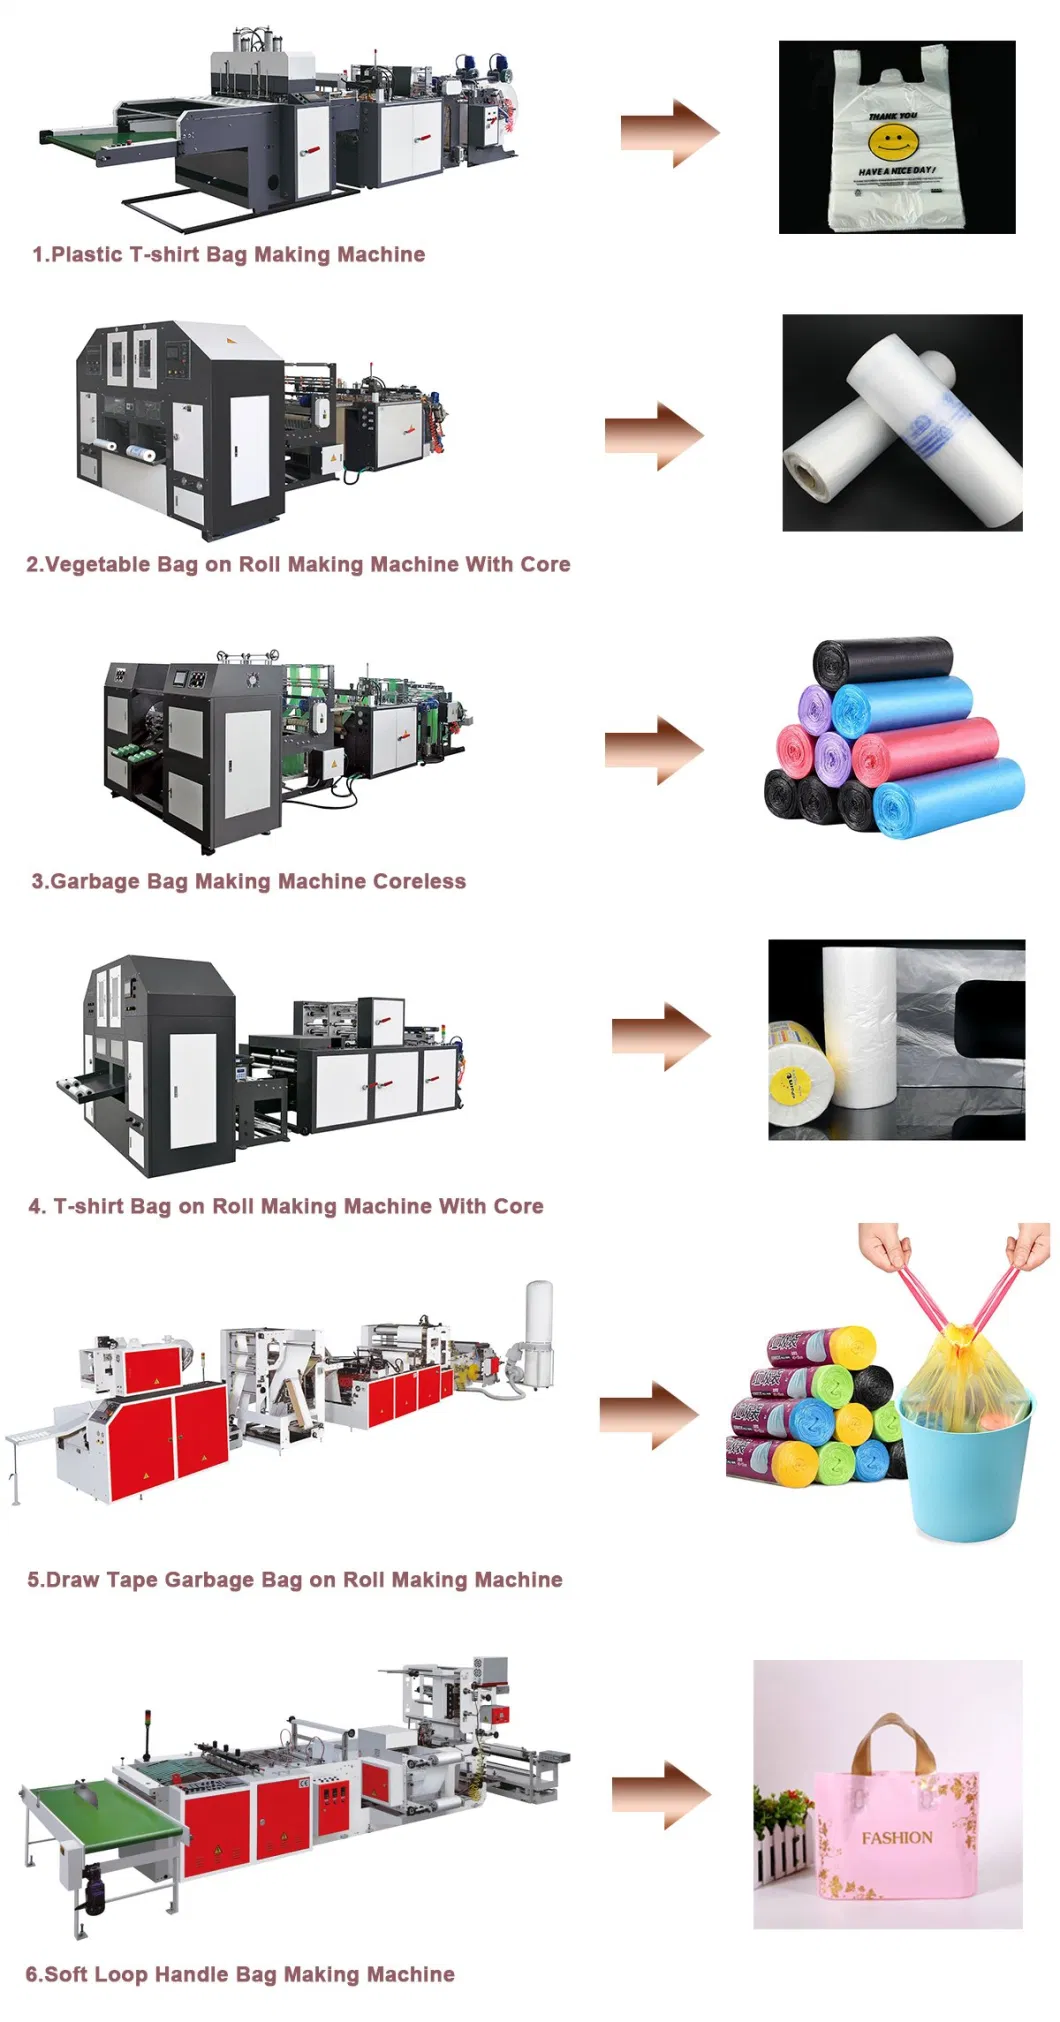 Heat Sealing Cold Cutting Independent Unwinder and PLC Computer Control System Automatic Film-Break and Core Change Bag-on-Roll with Core Making Machine